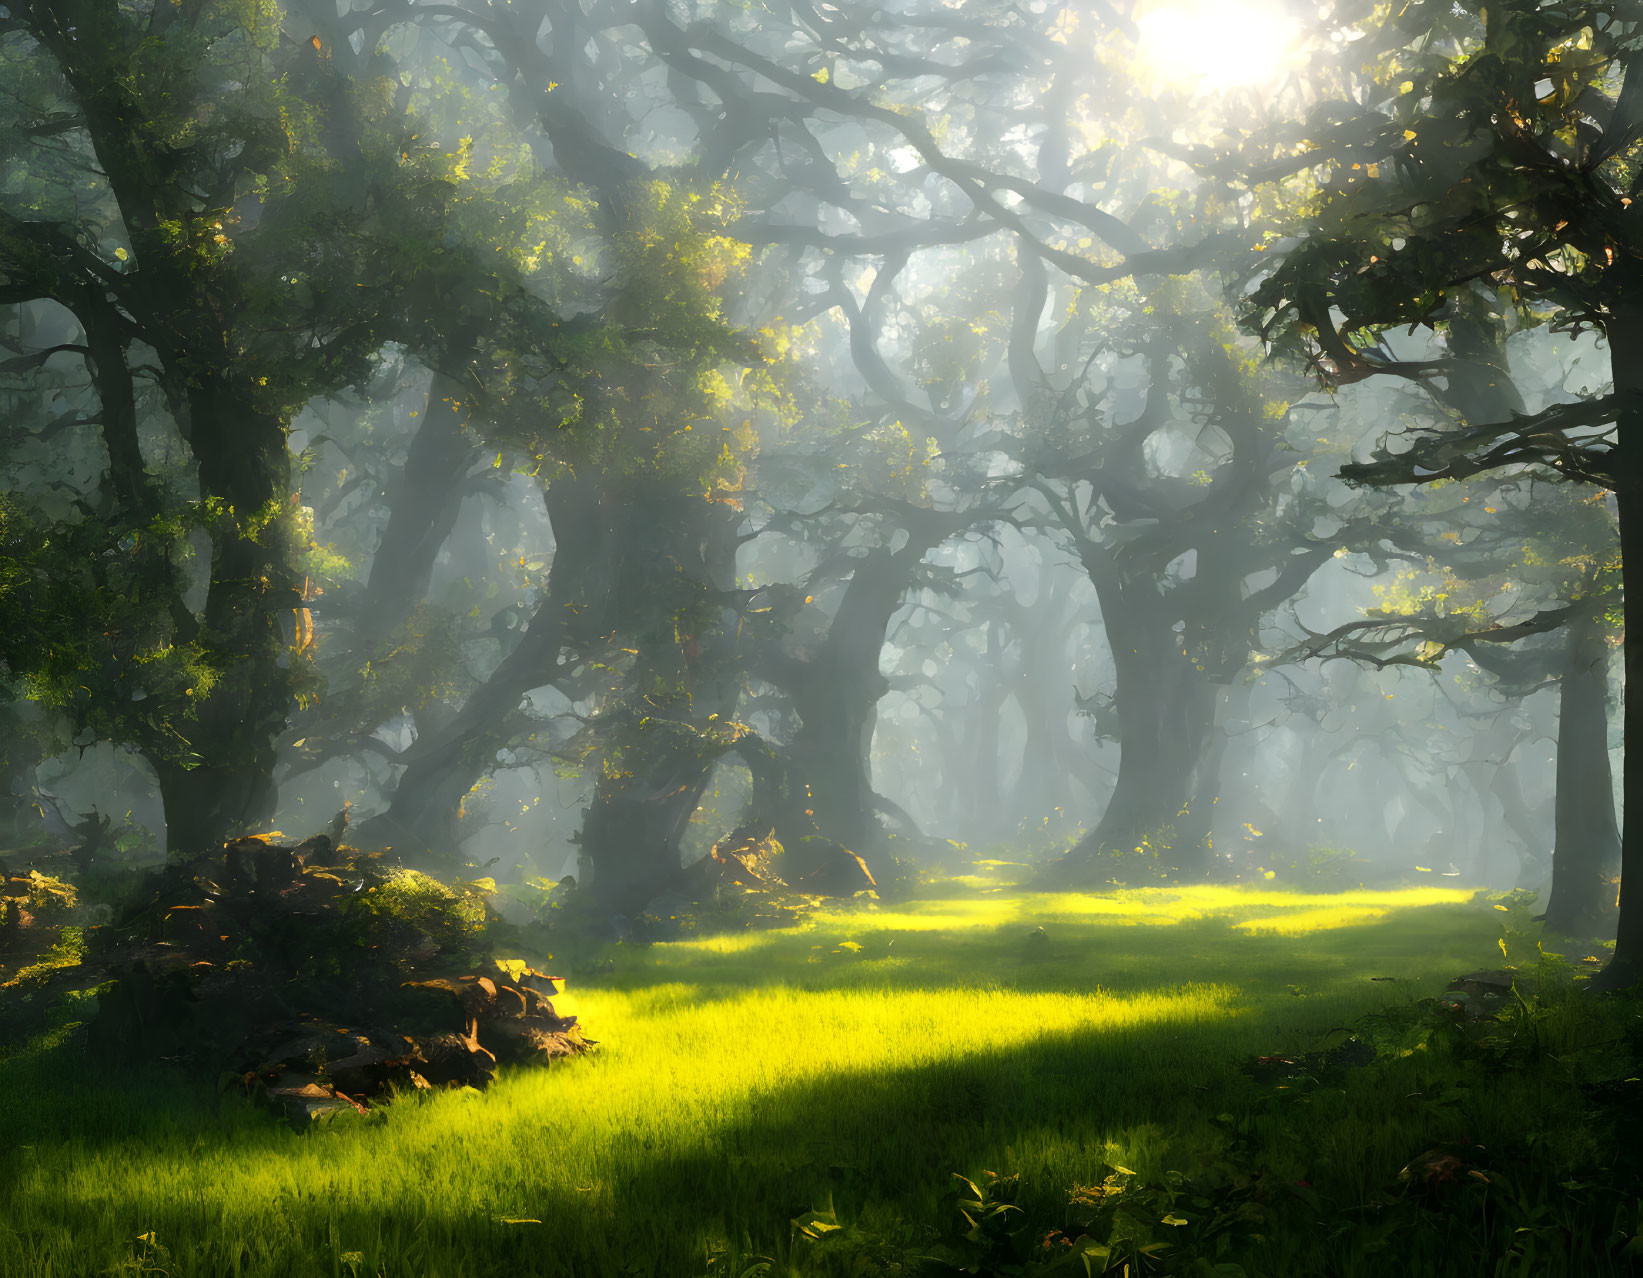 Misty forest with sunlight filtering through